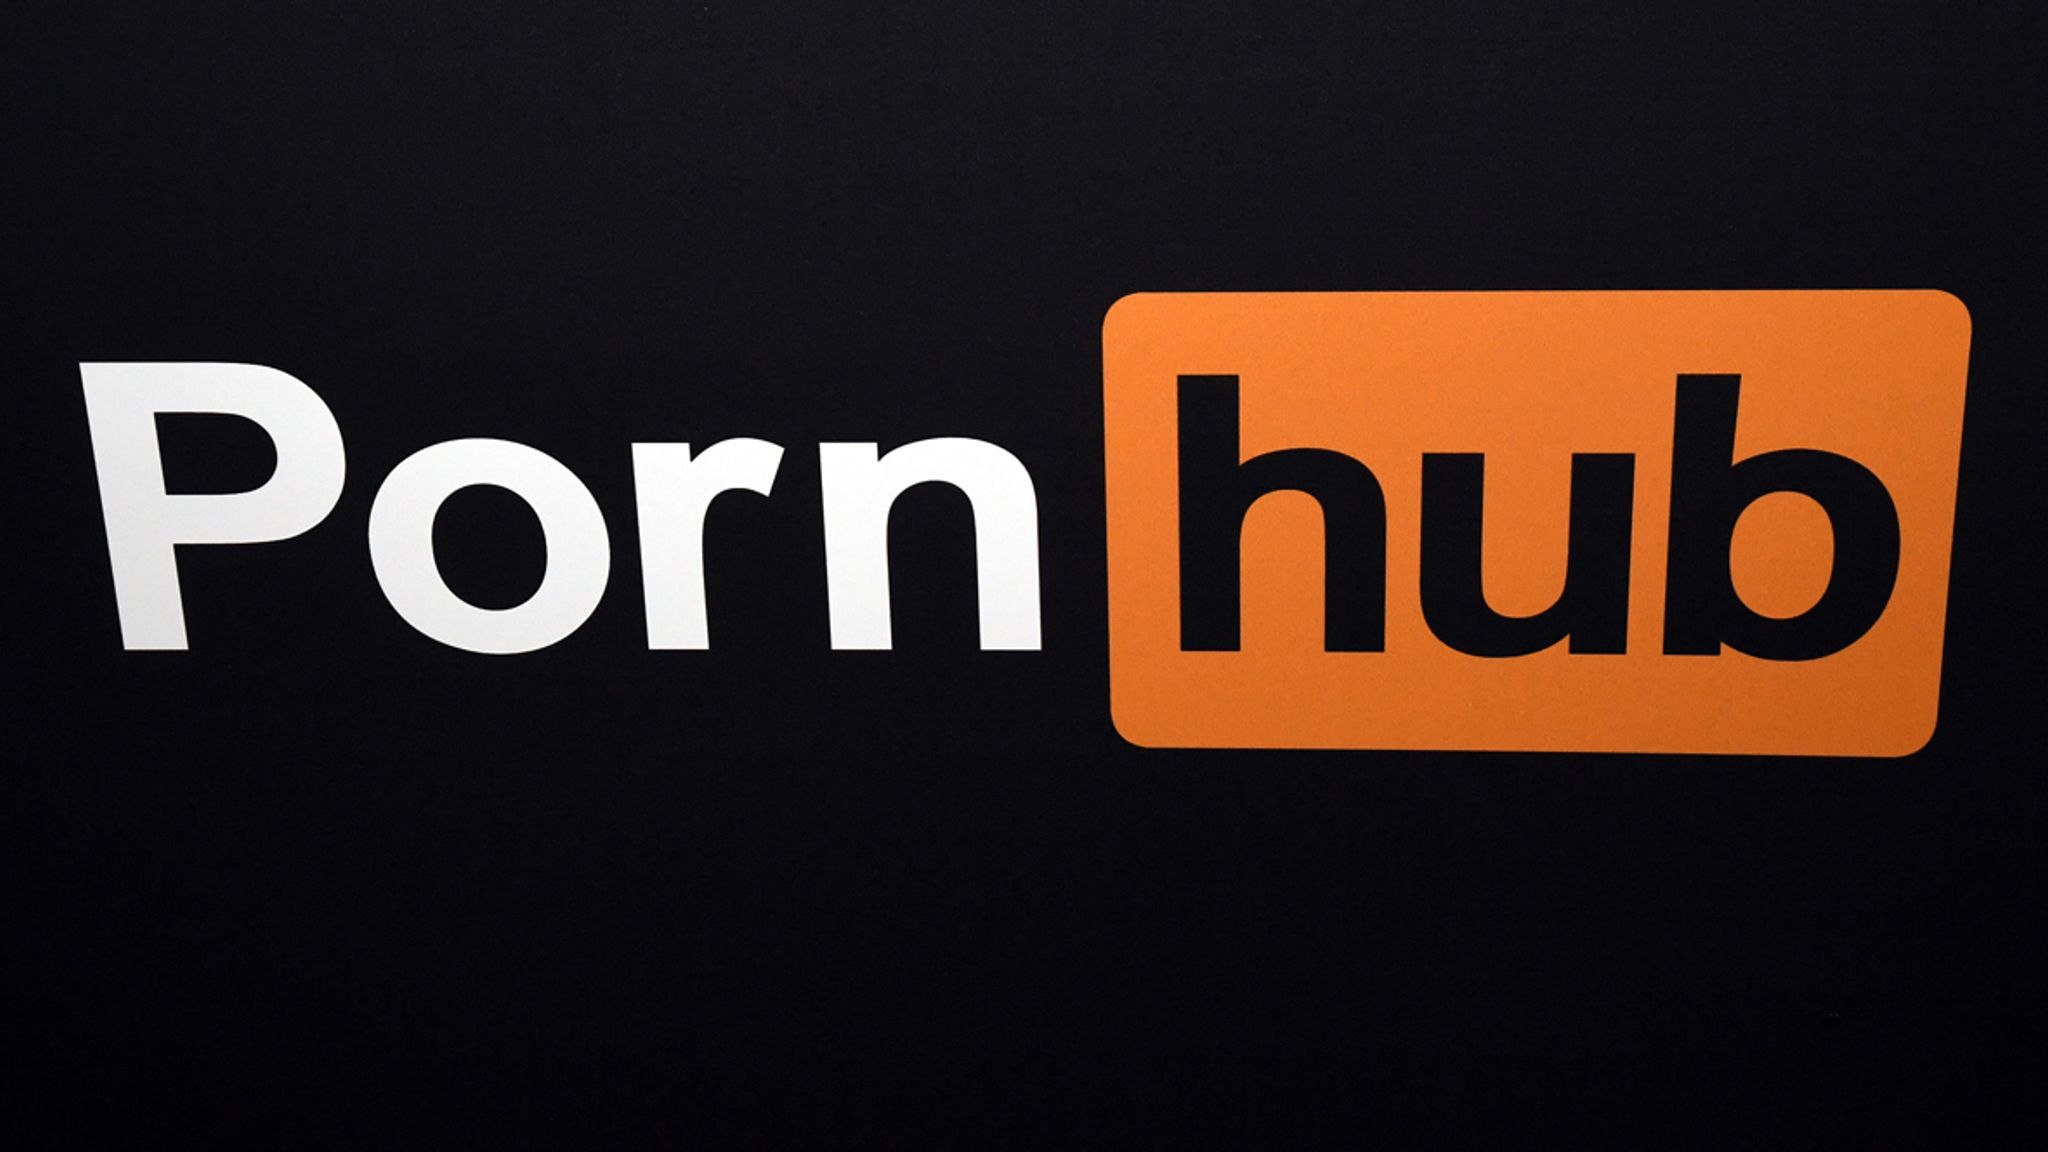 Pornhub says it is 'extremely disappointed' by the decision...